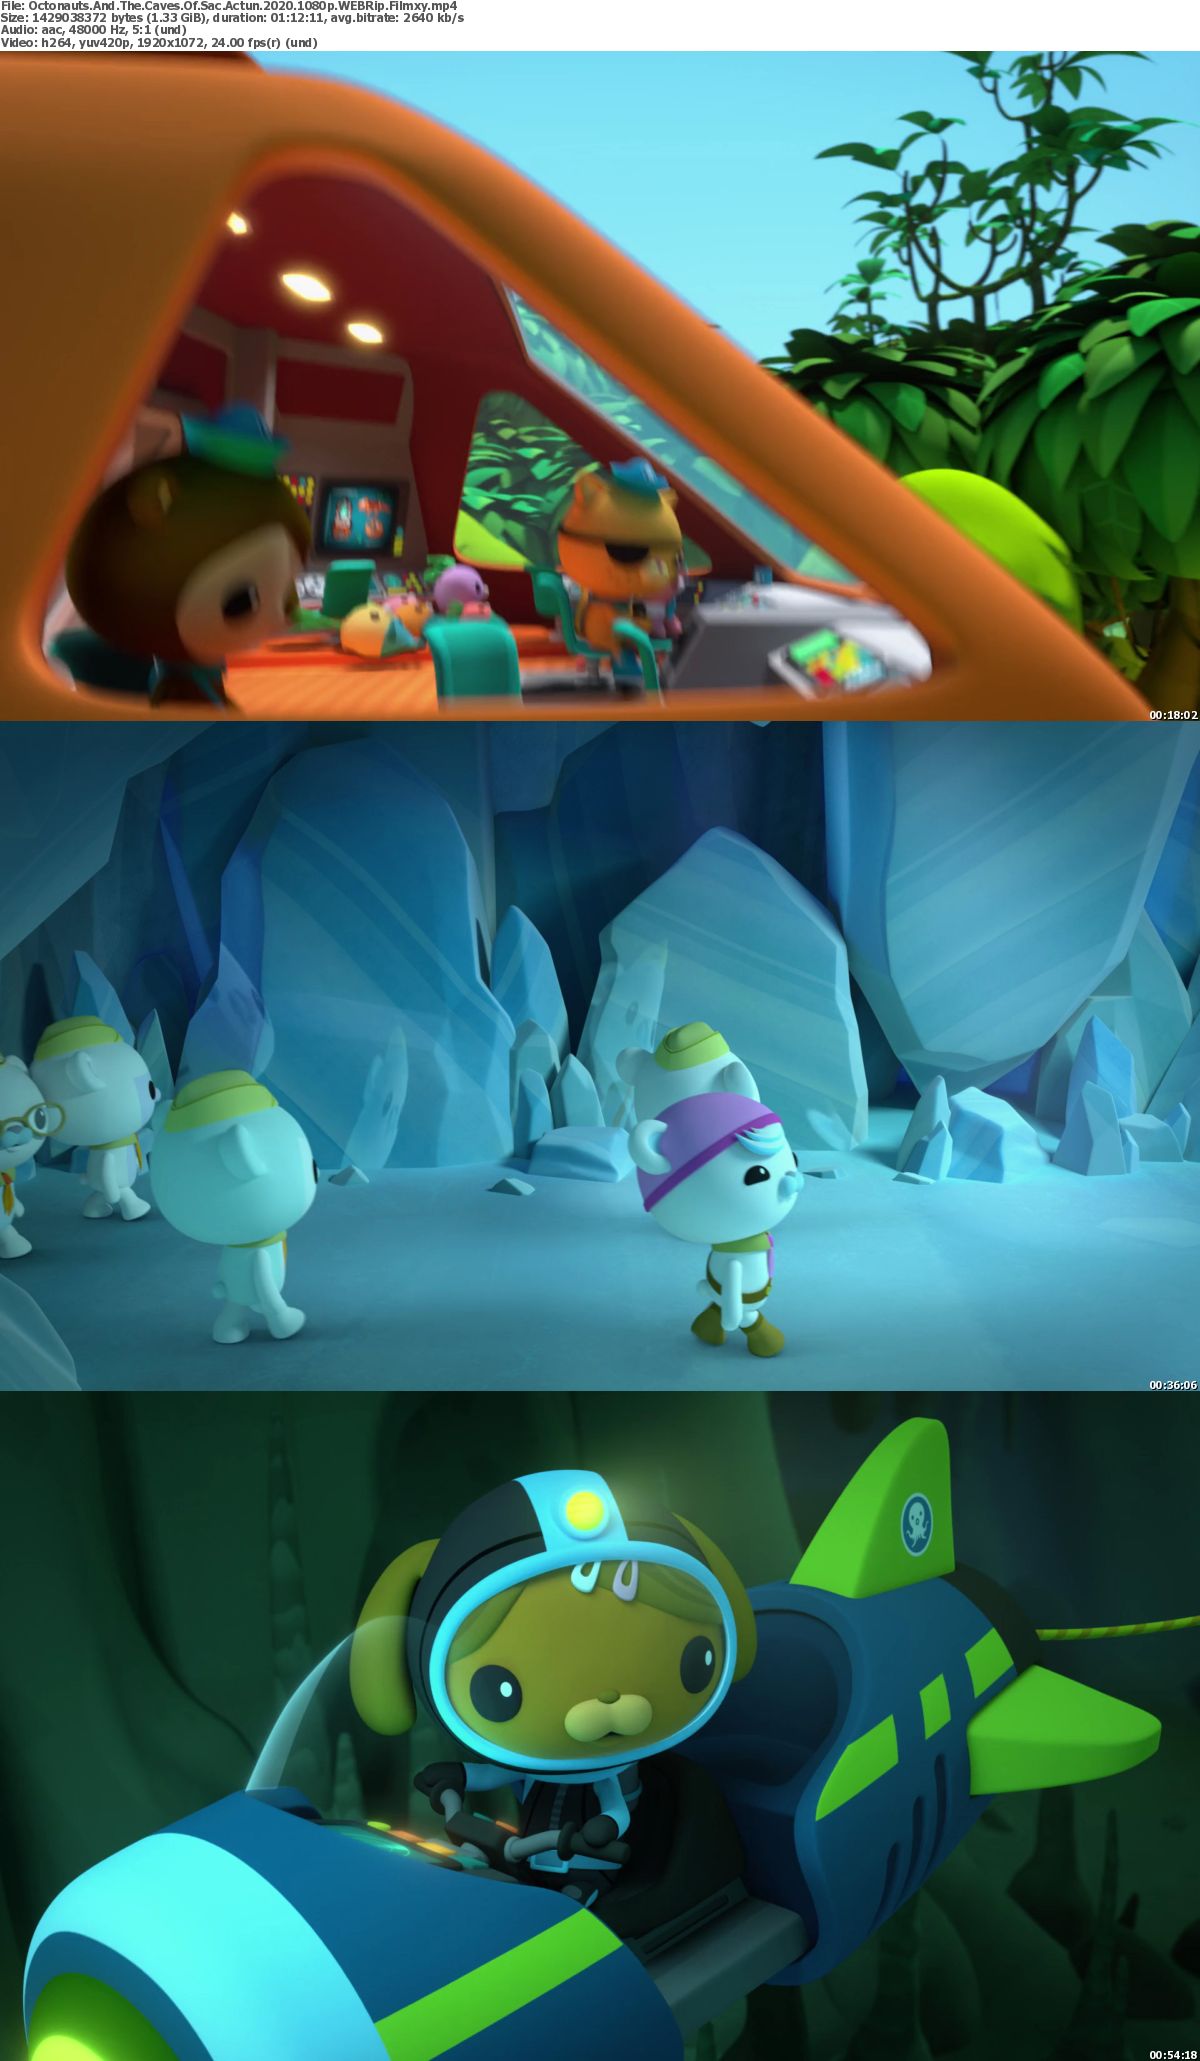 2020 Octonauts And The Caves Of Sac Actun